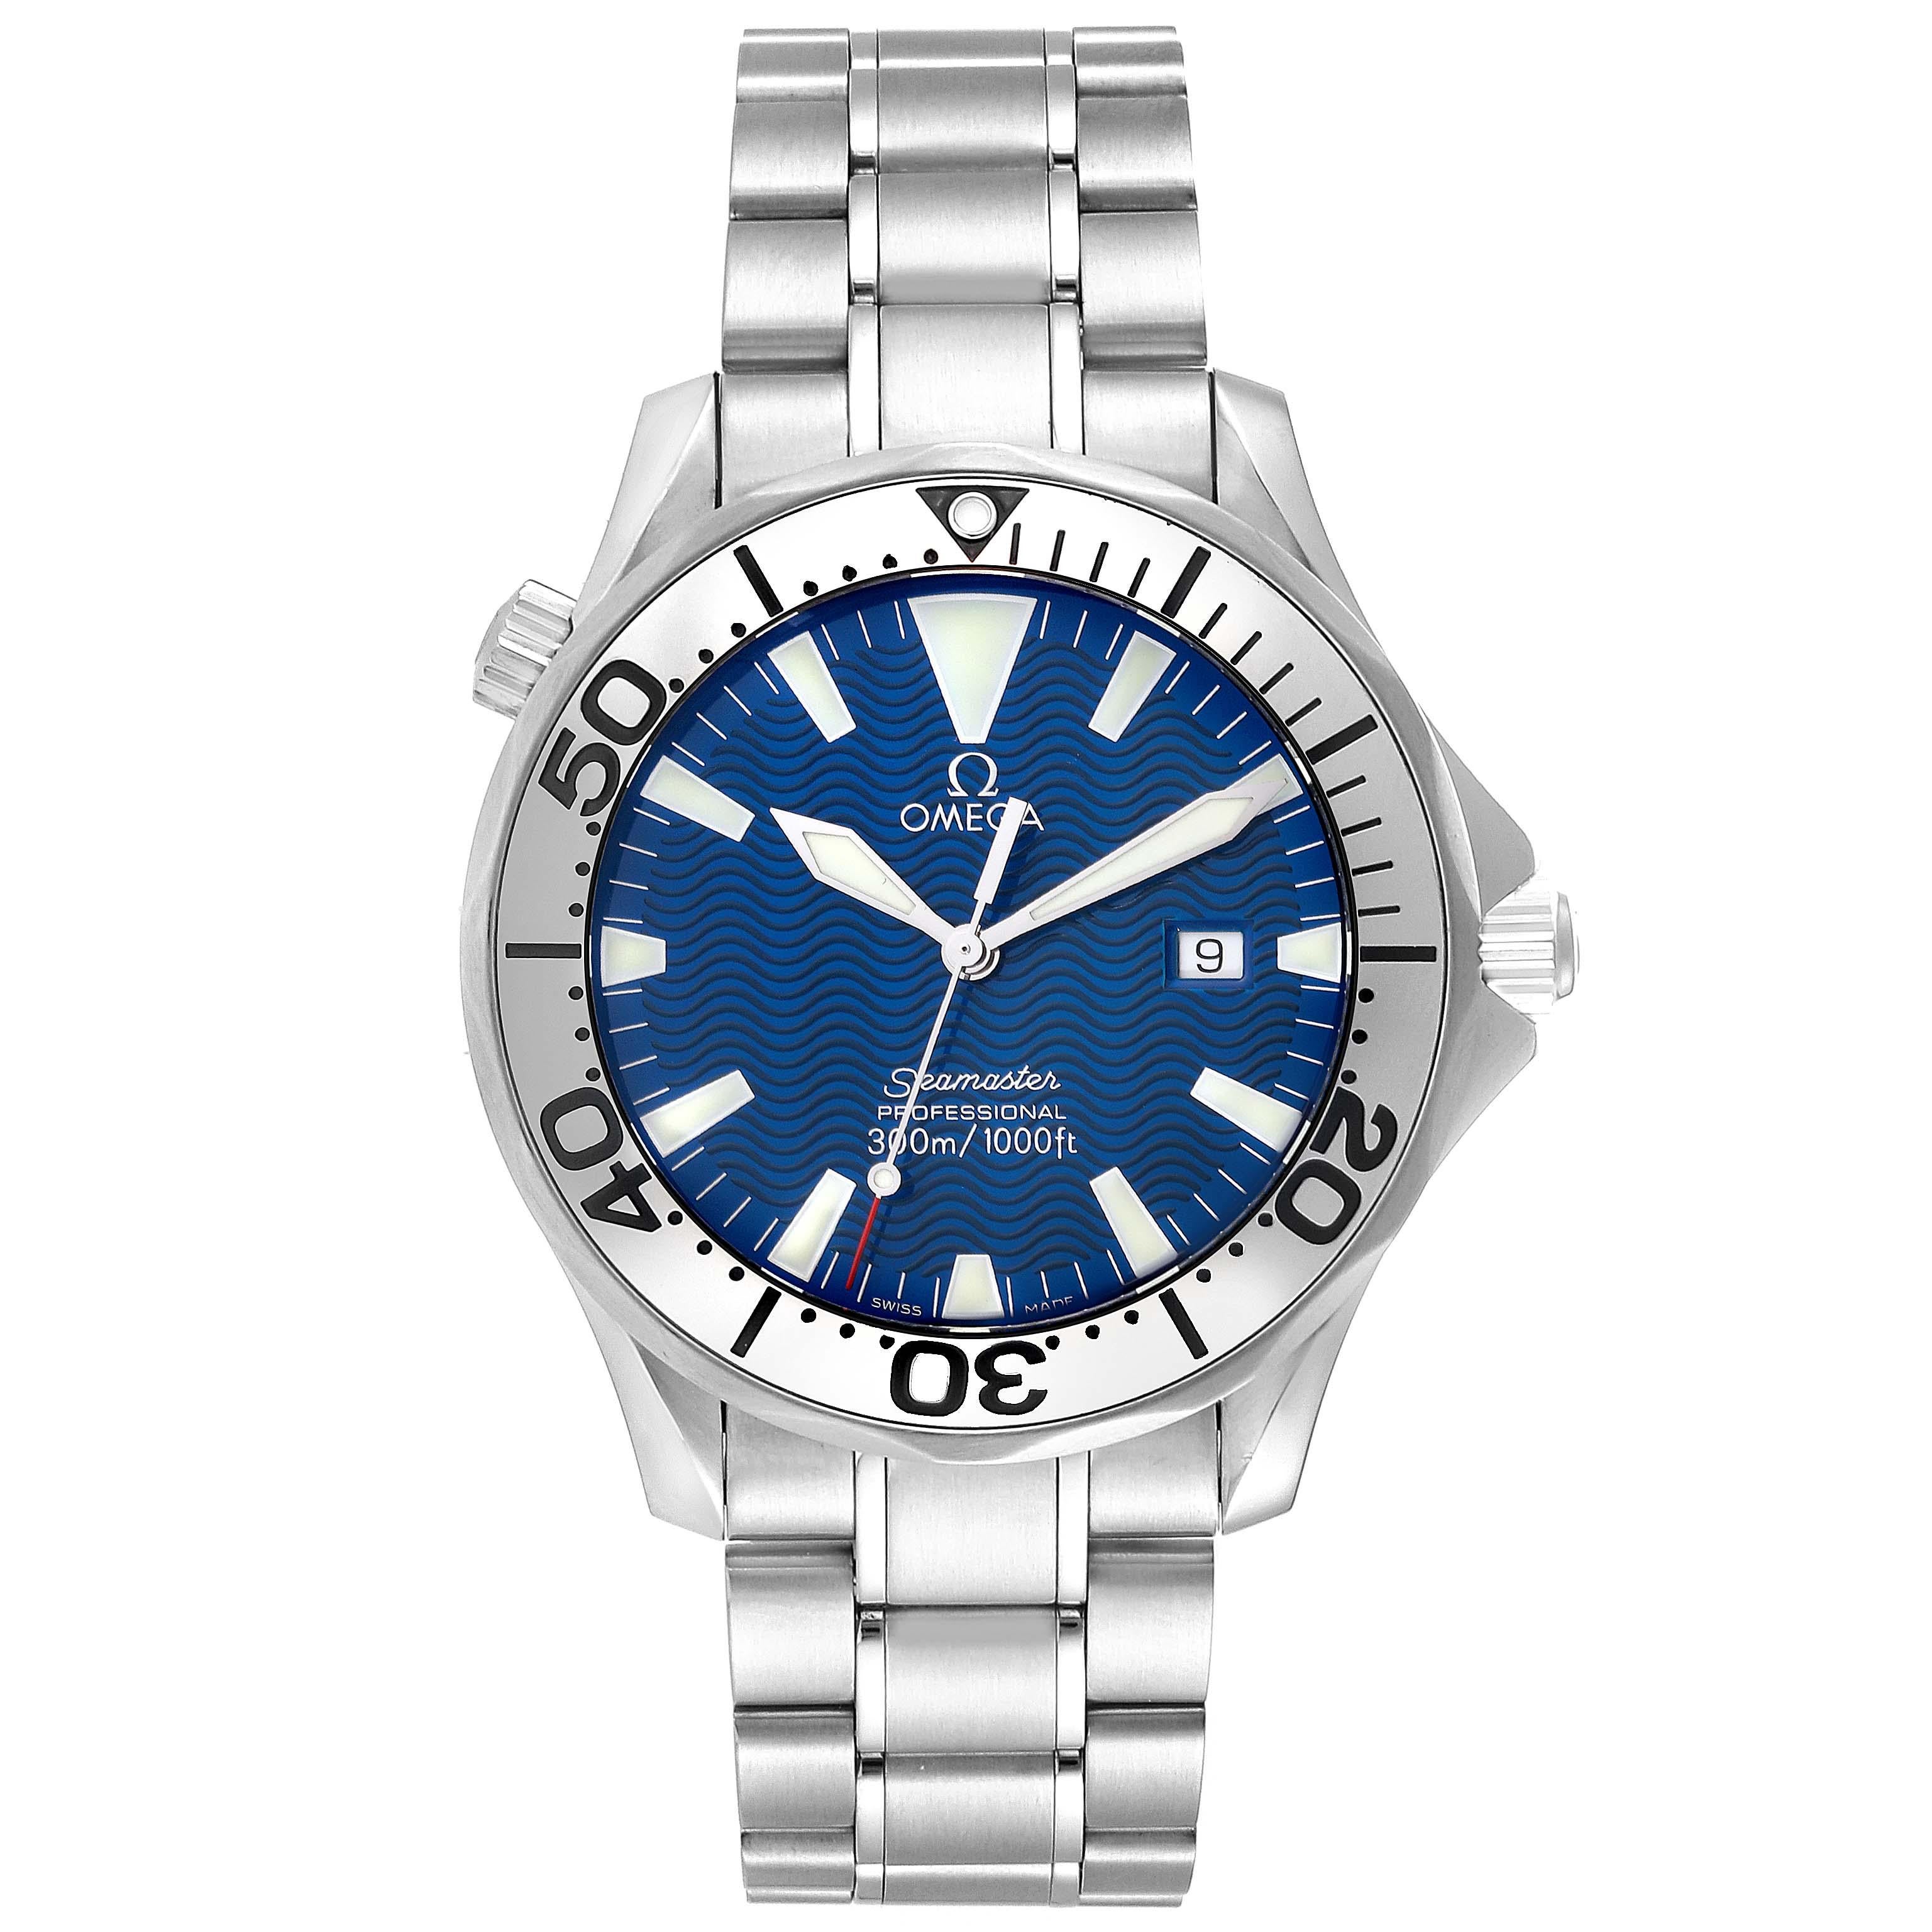 Omega Seamaster Electric Blue Wave Dial Steel Mens Watch 2265.80.00 1